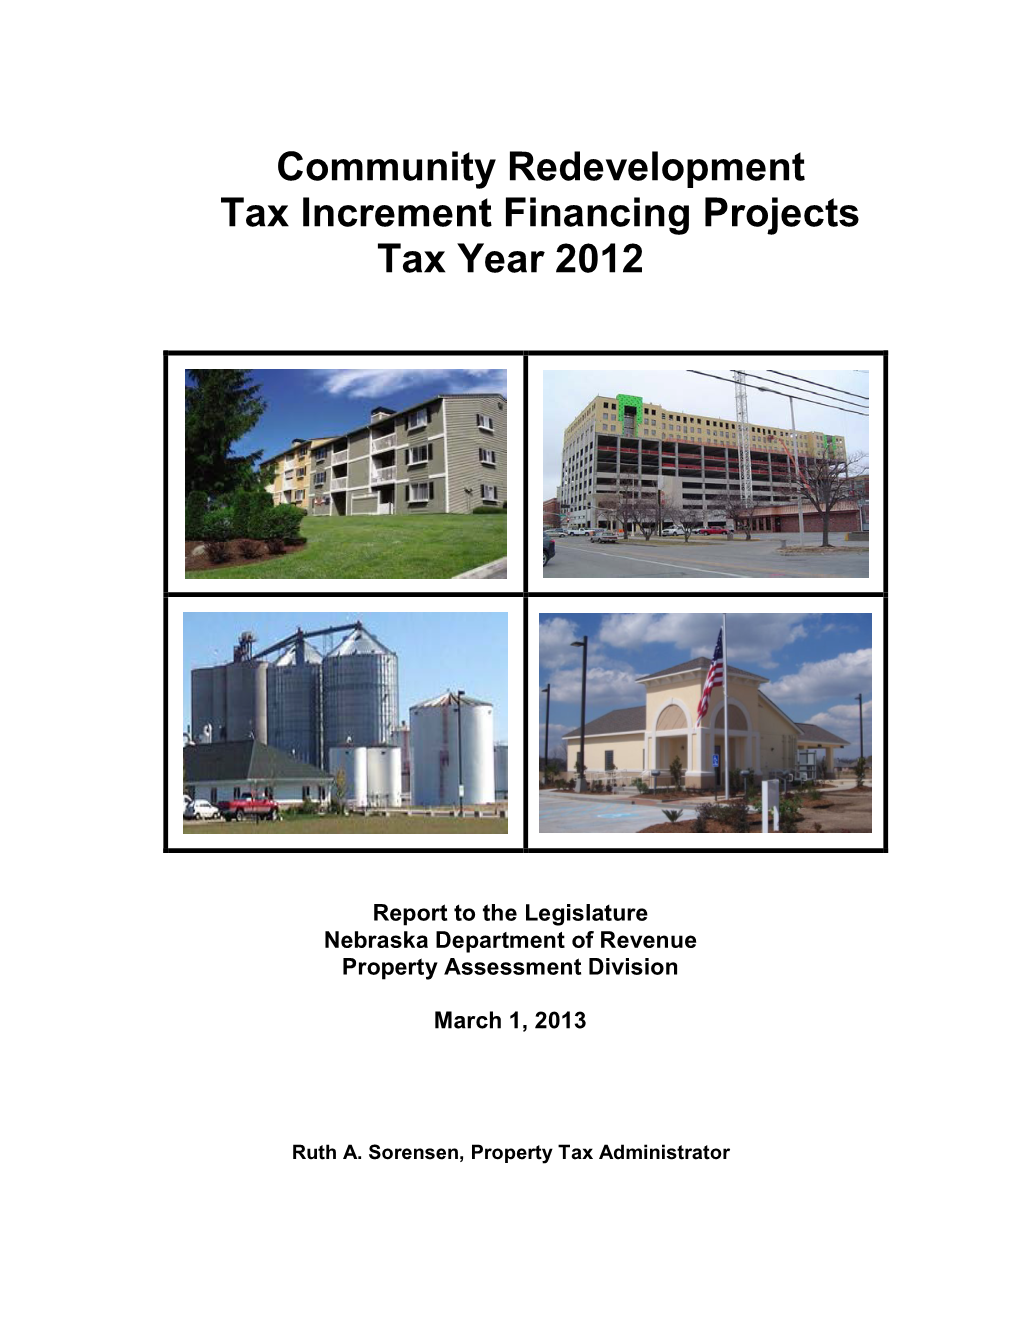 Community Redevelopment Tax Increment Financing Projects Tax Year 2012